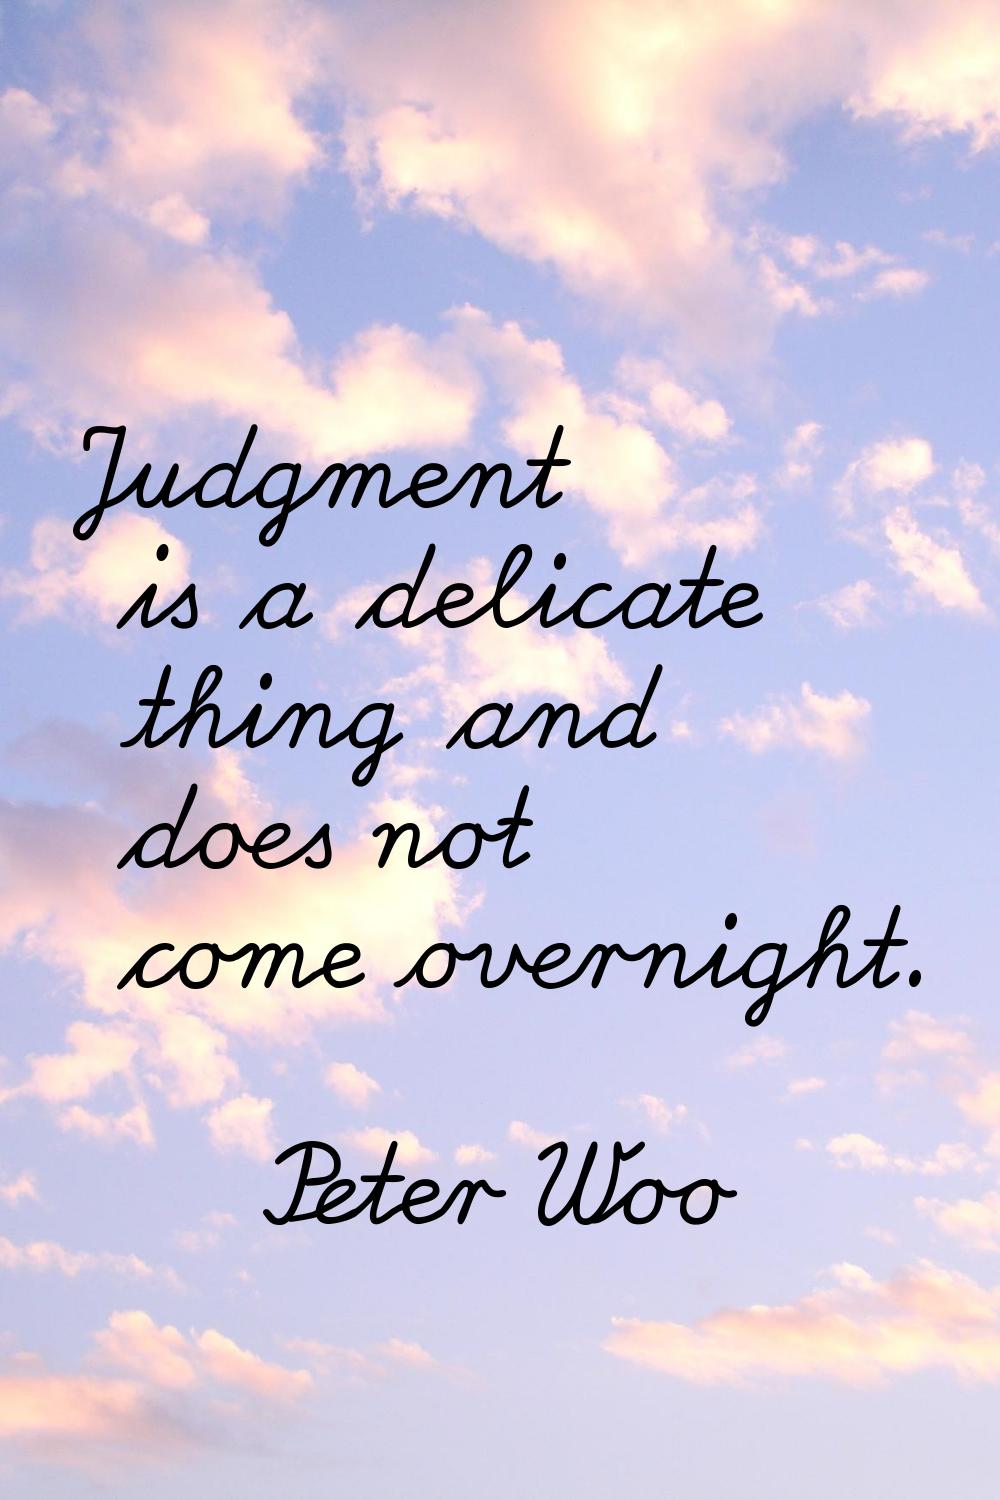 Judgment is a delicate thing and does not come overnight.